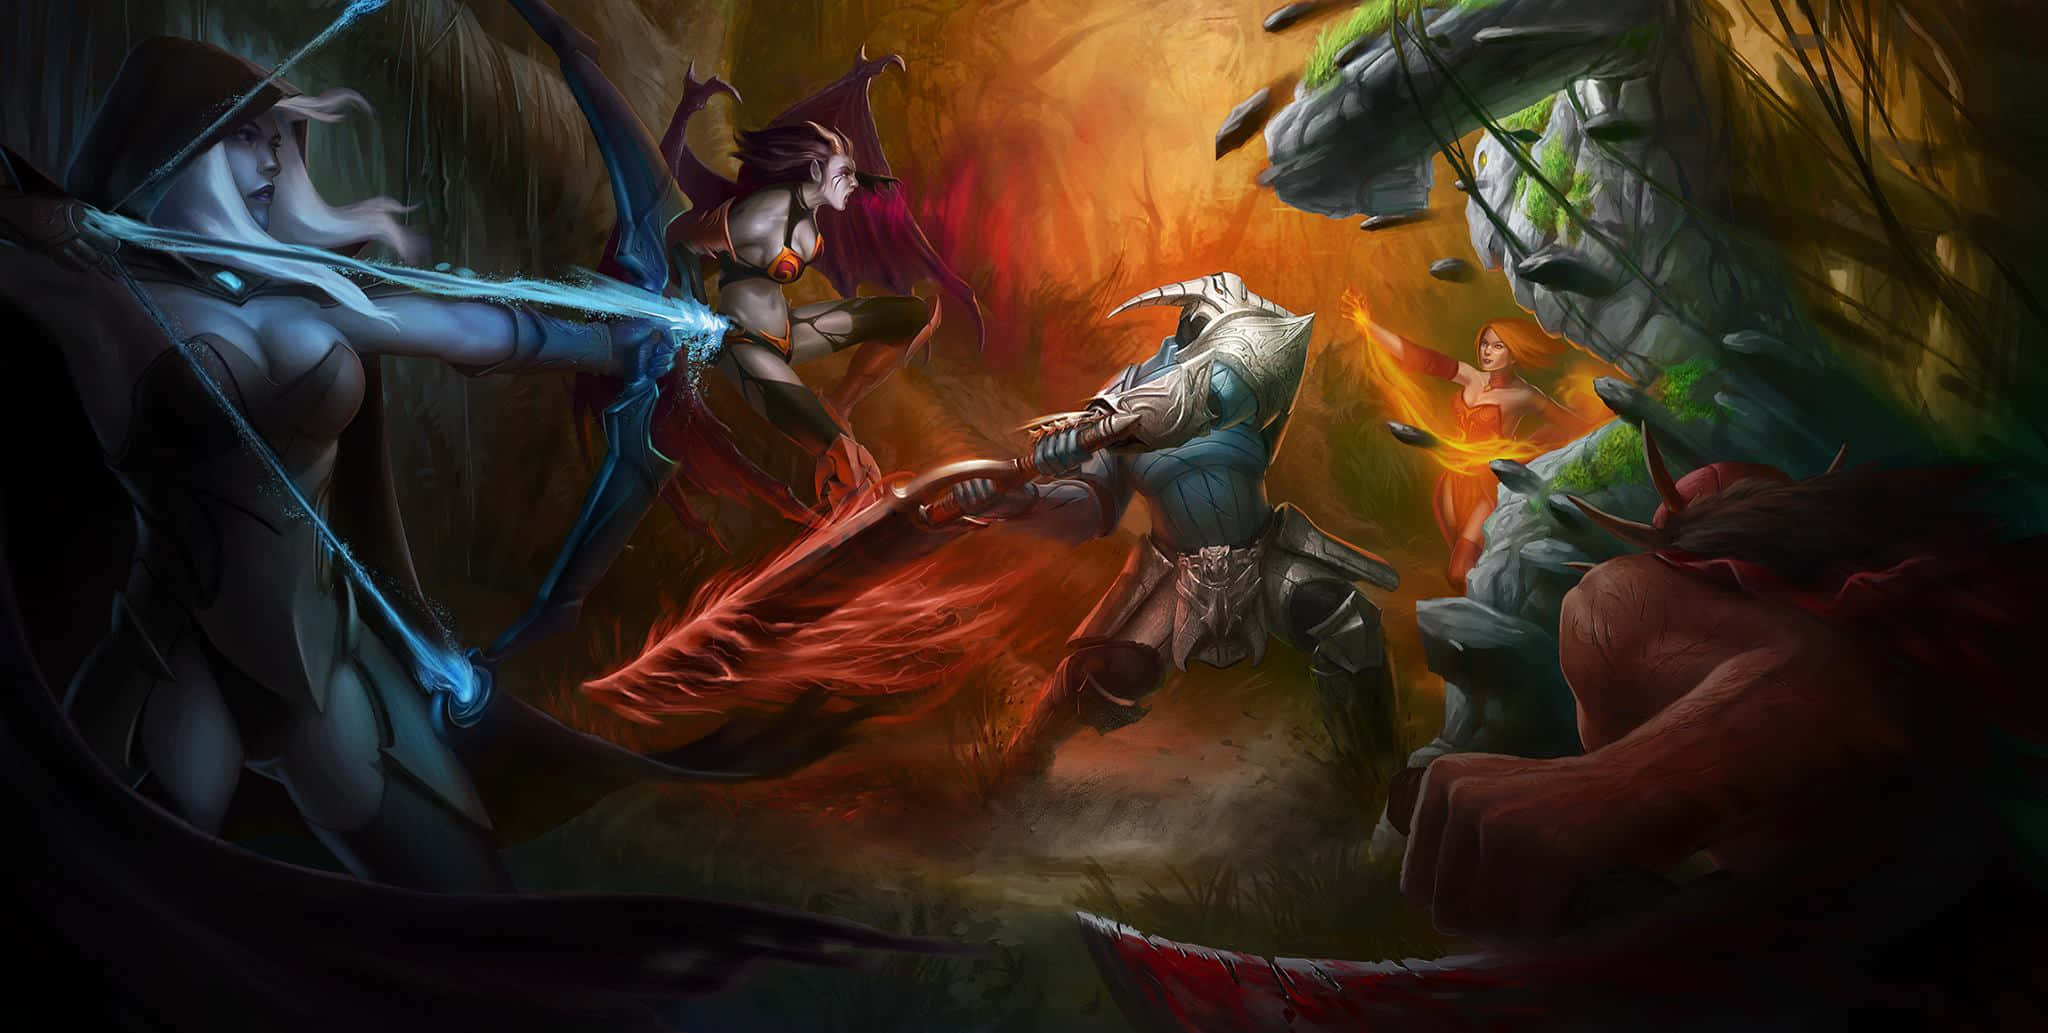 A stunning Dota 2 gaming background featuring iconic heroes.